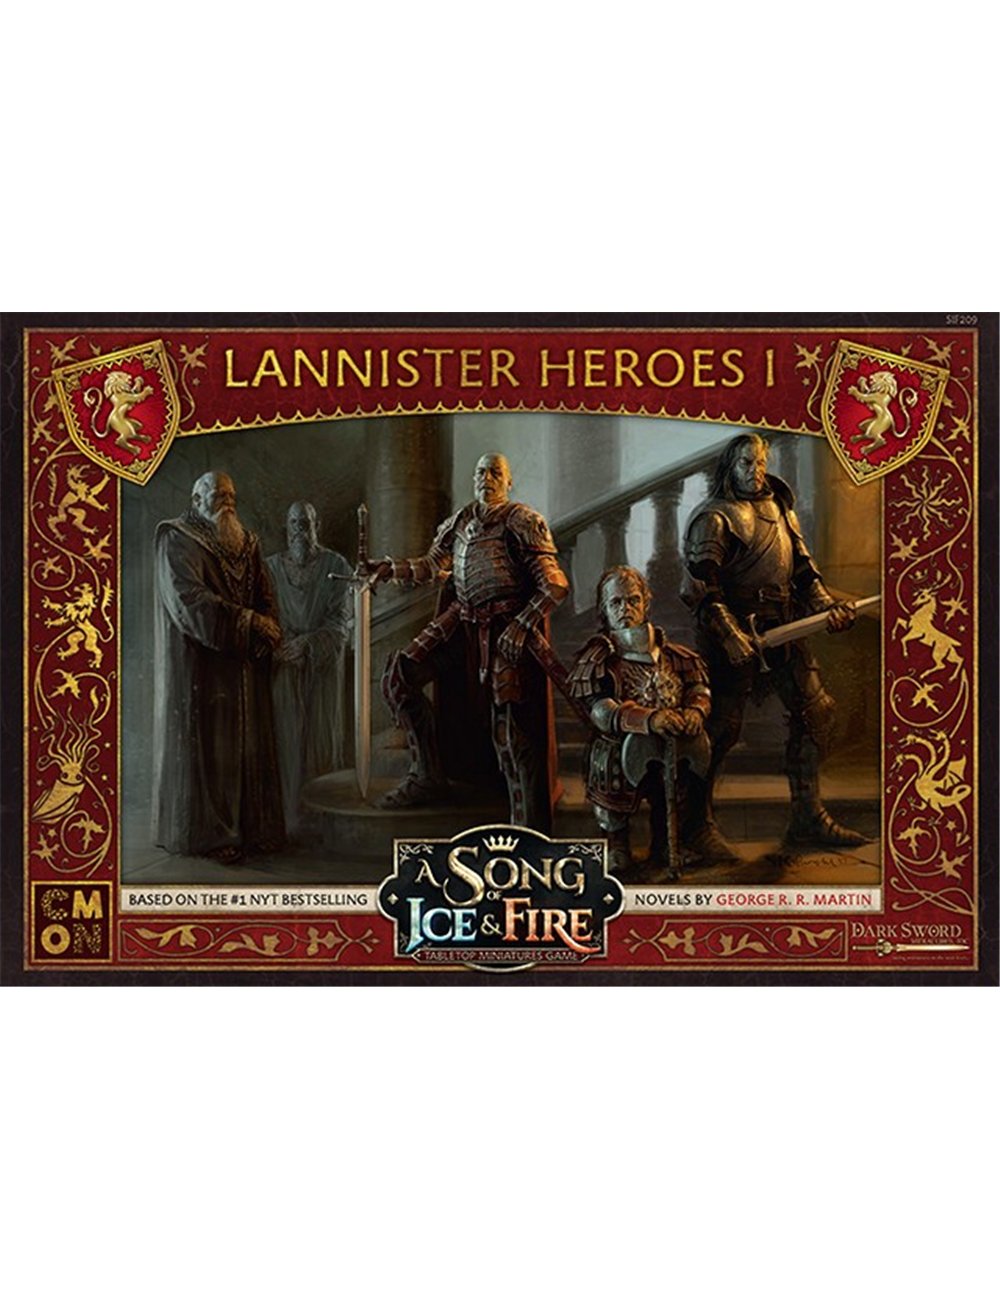 A SONG OF ICE & FIRE: Lannister Heroes 1